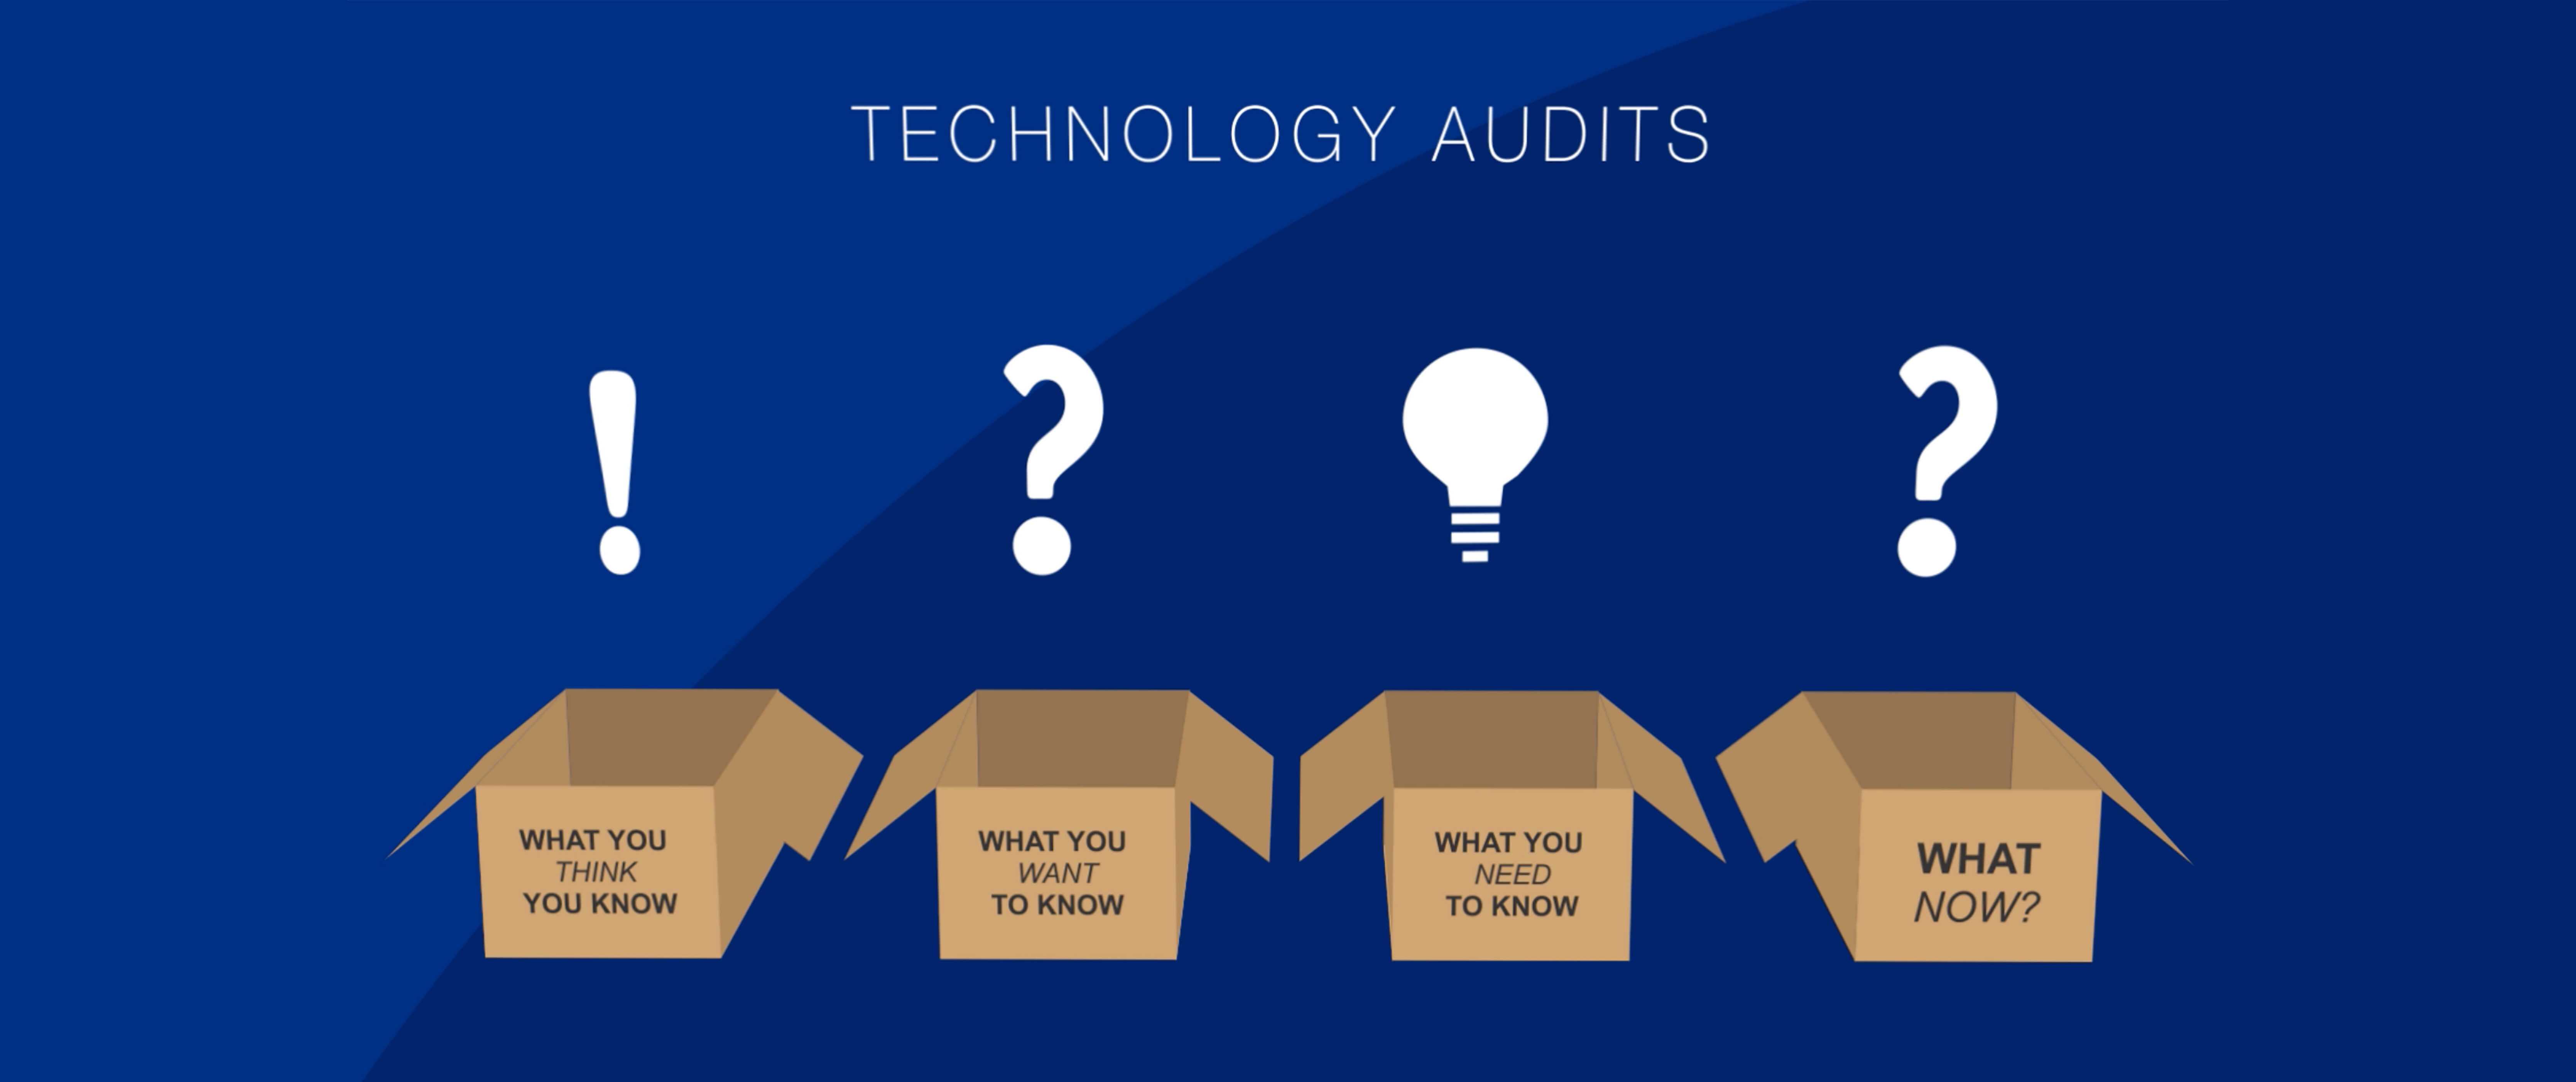 Technology Audits: What you think you know, what you want to know, what you need to know, what now?